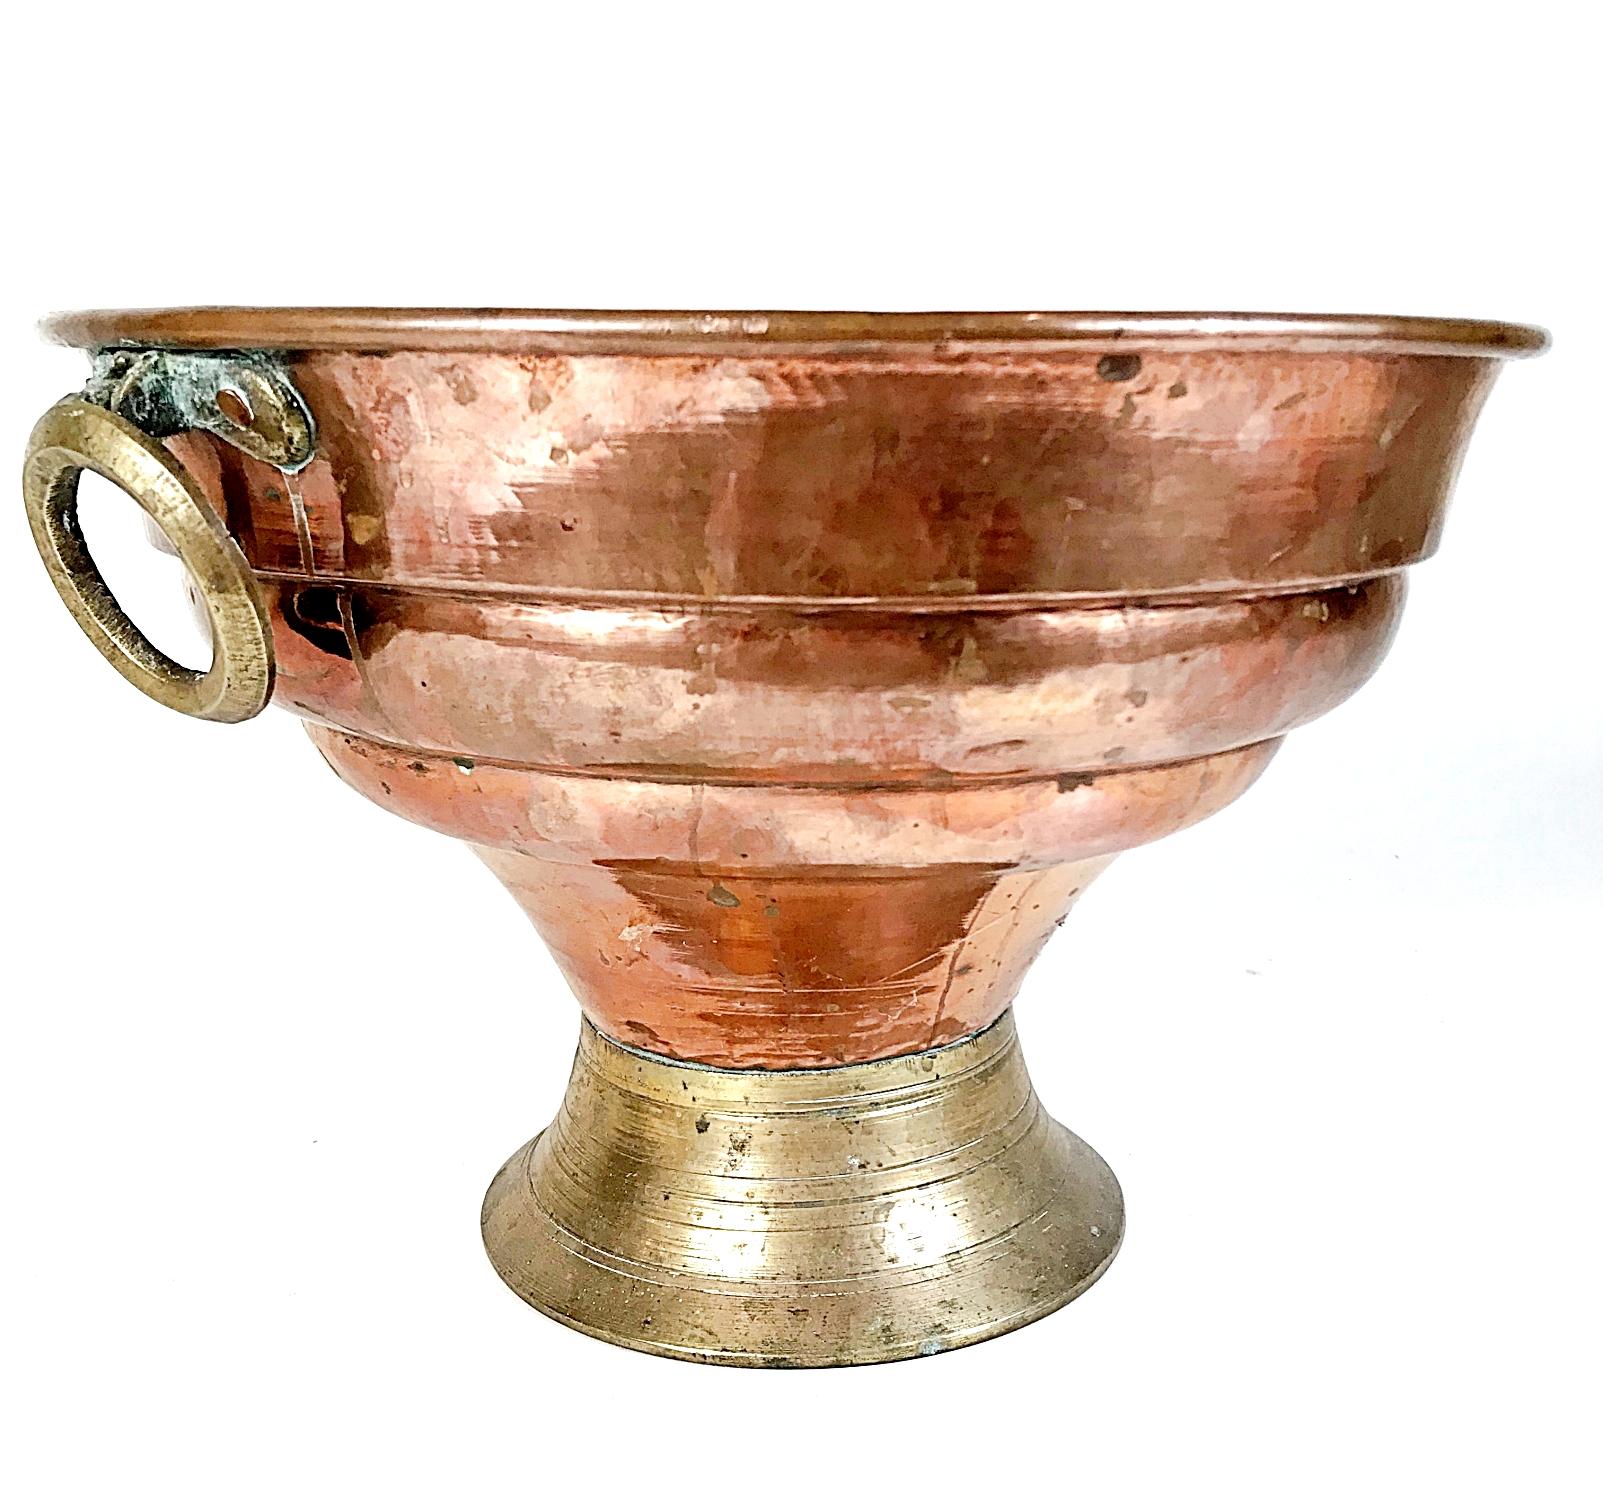 Beautiful 19th century handmade / hammered copper cooler with brass ringlet handles. Perfect for cooling of four bottles of wine, champagne, water etc. Can be also used as a Jardinière.